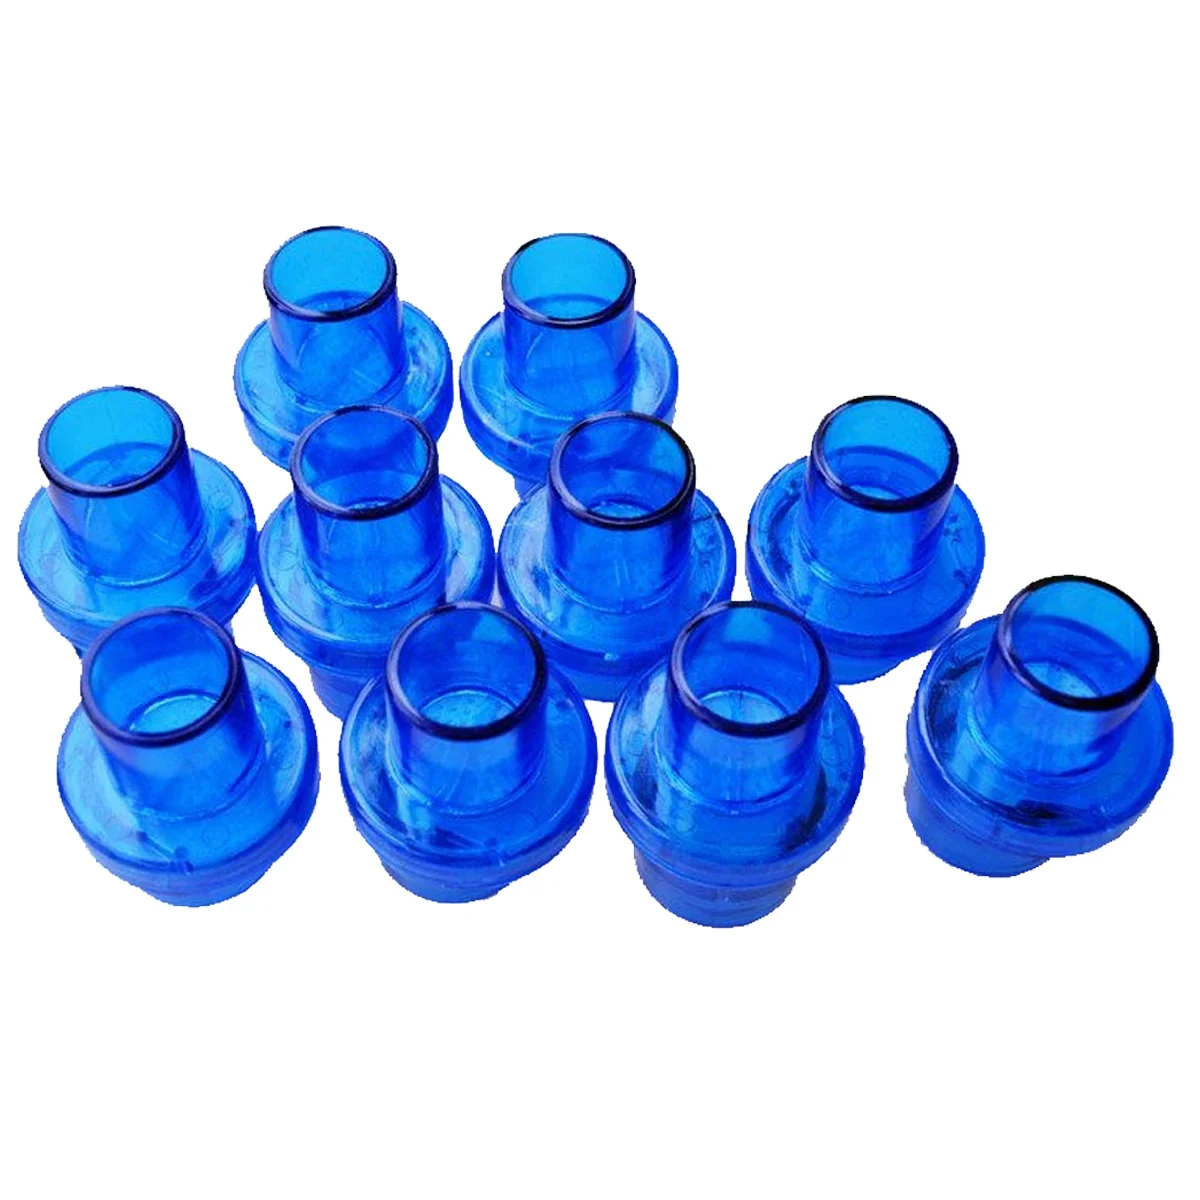 

1000Pcs/lot Blue Valve For Cpr Training Mask Mouth to Mouth Breathing Rescue One-Way Valve Cpr First Aid Training Dia 22mm